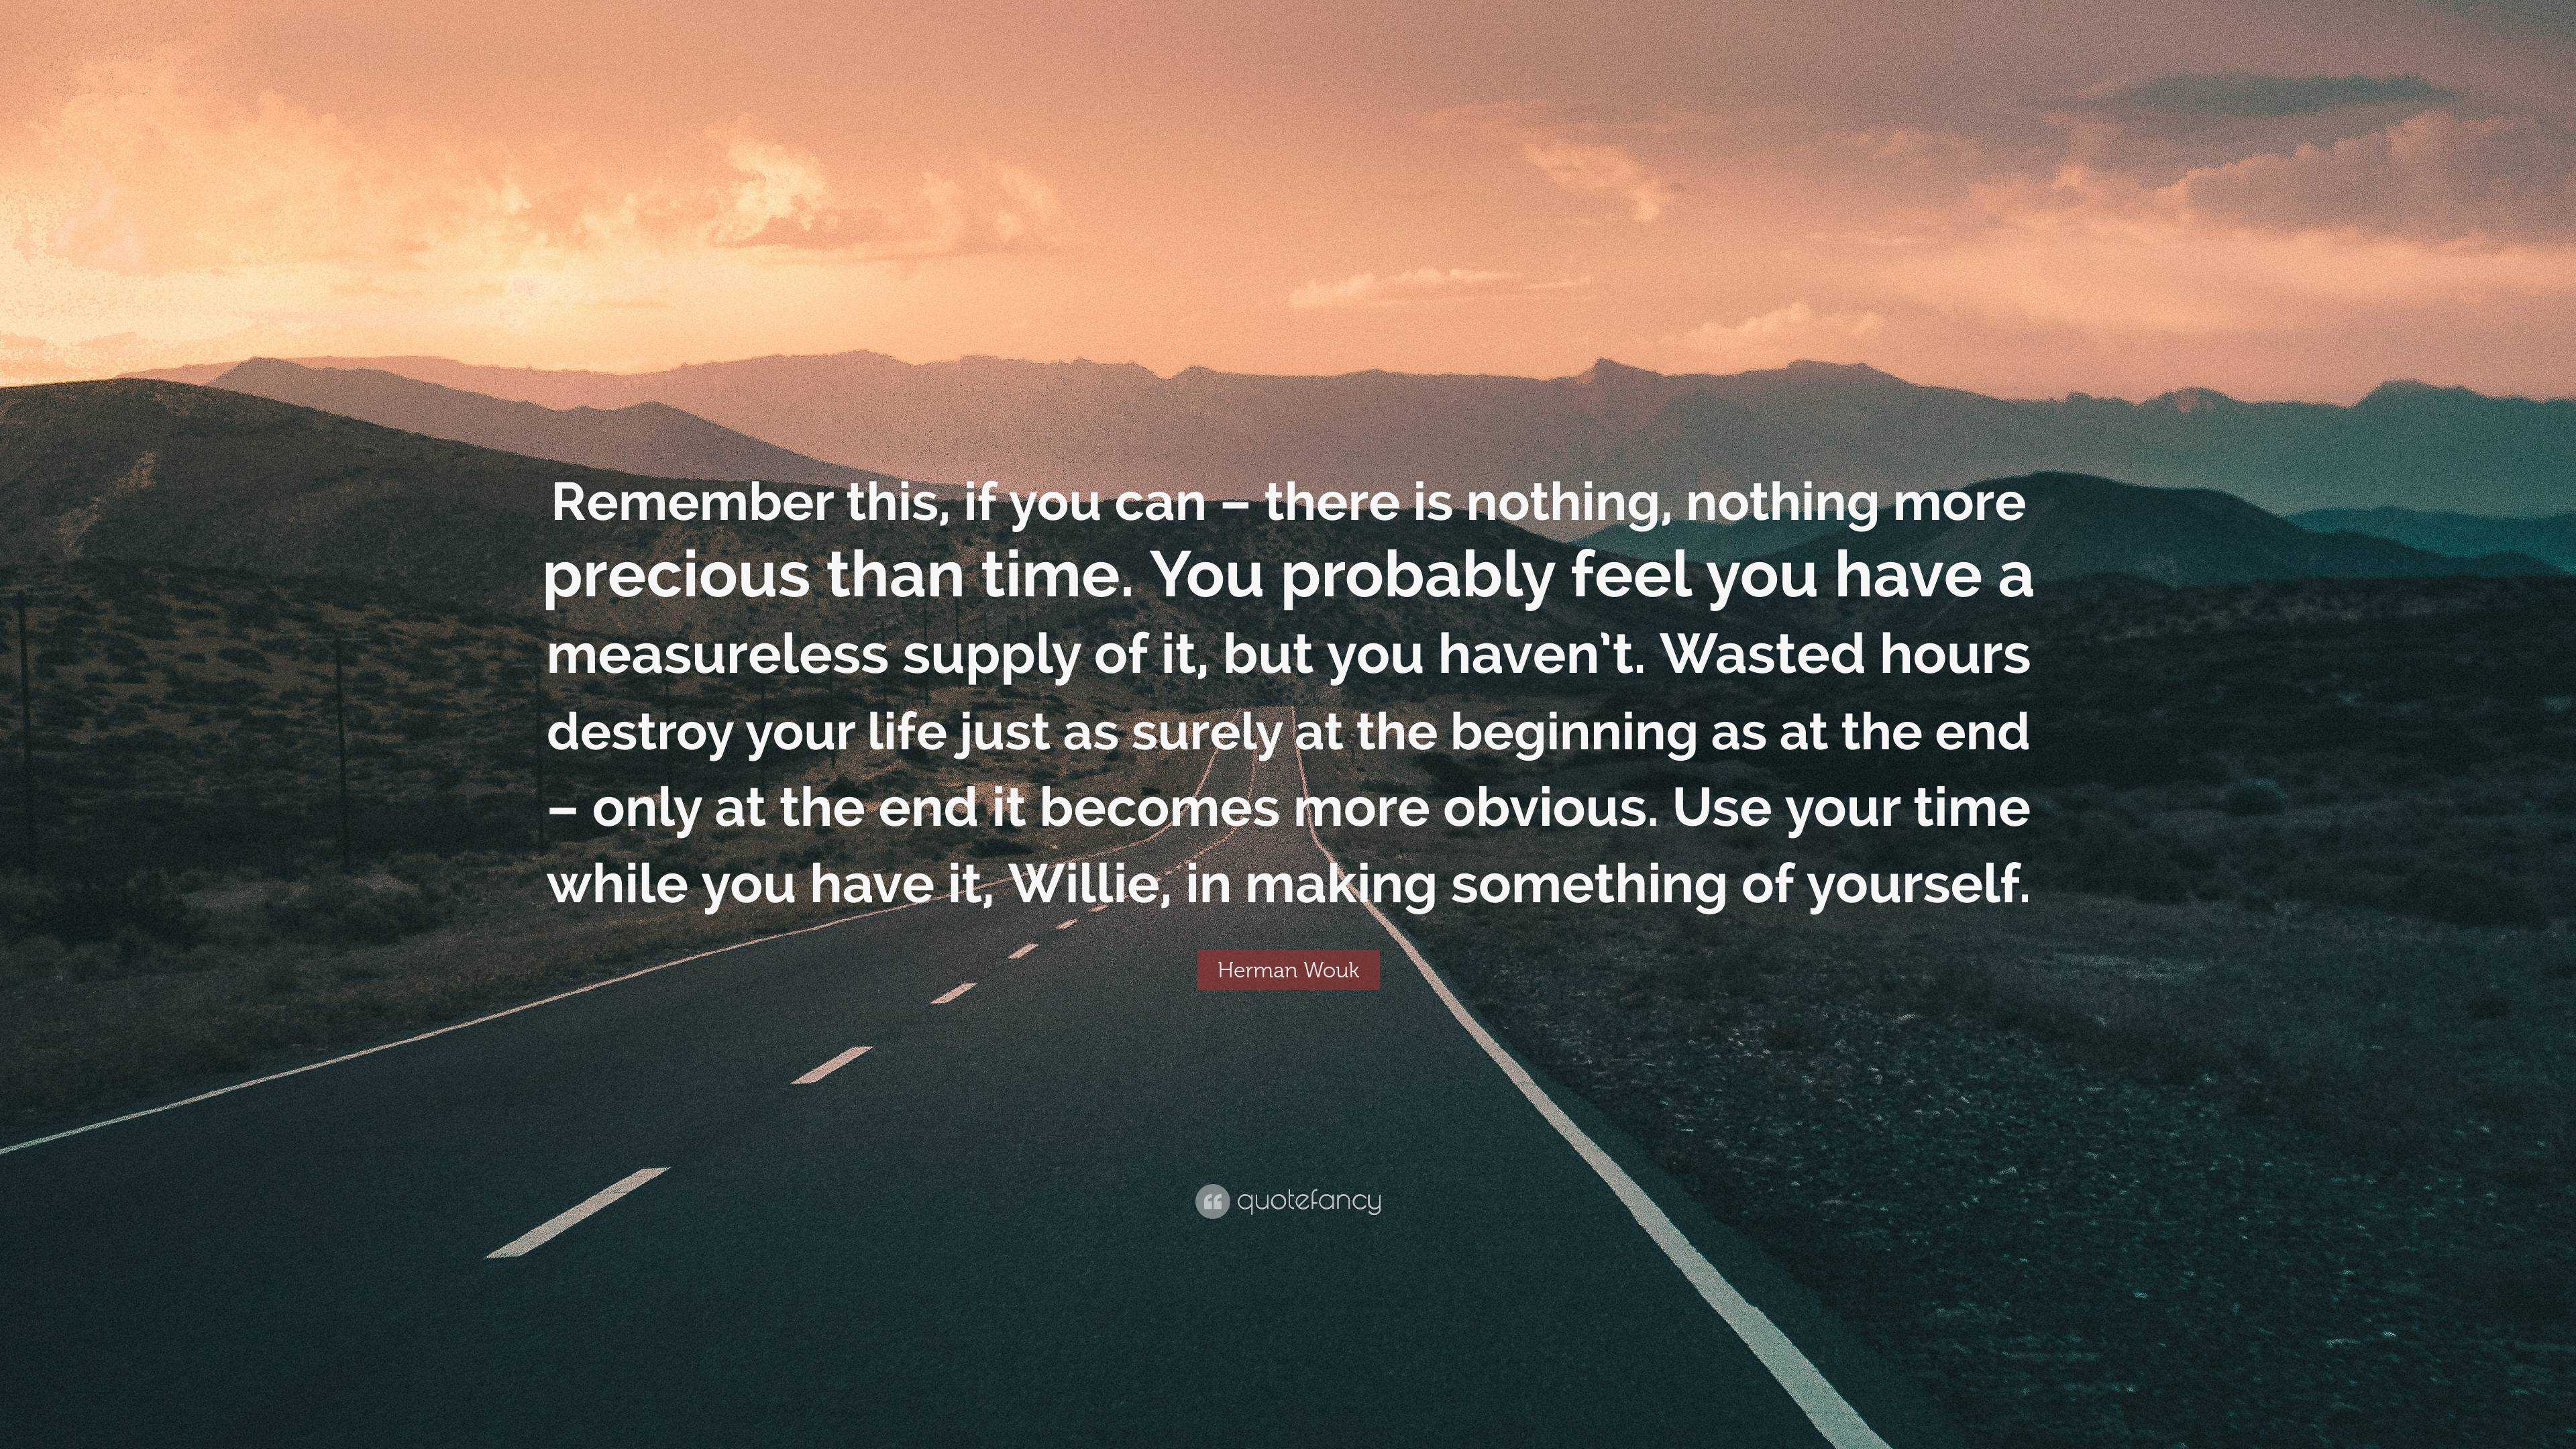 Herman Wouk Quote: “Remember this, if you can – is nothing, nothing more precious than time. You probably feel you have a measureless ...”